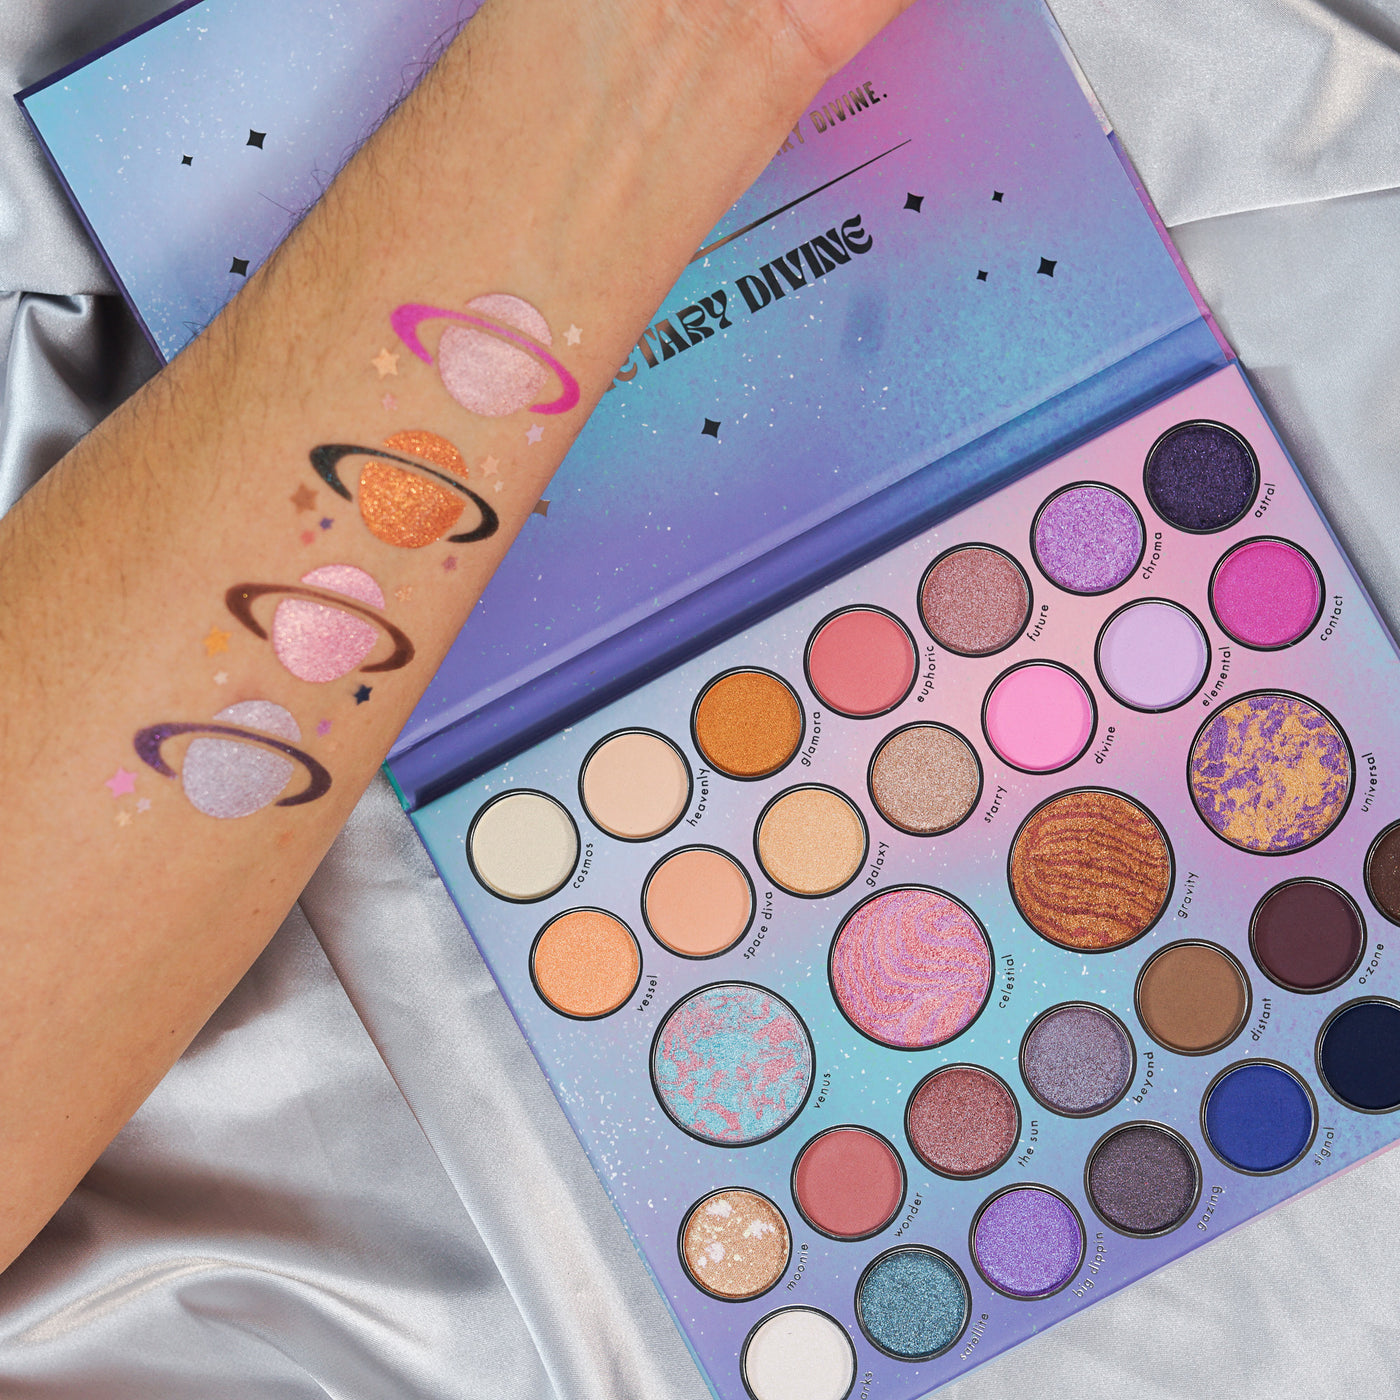 Swatches of Kara Beauty's Planetary Divine Space-themed 32-Shades Vegan Eyeshadow Palette